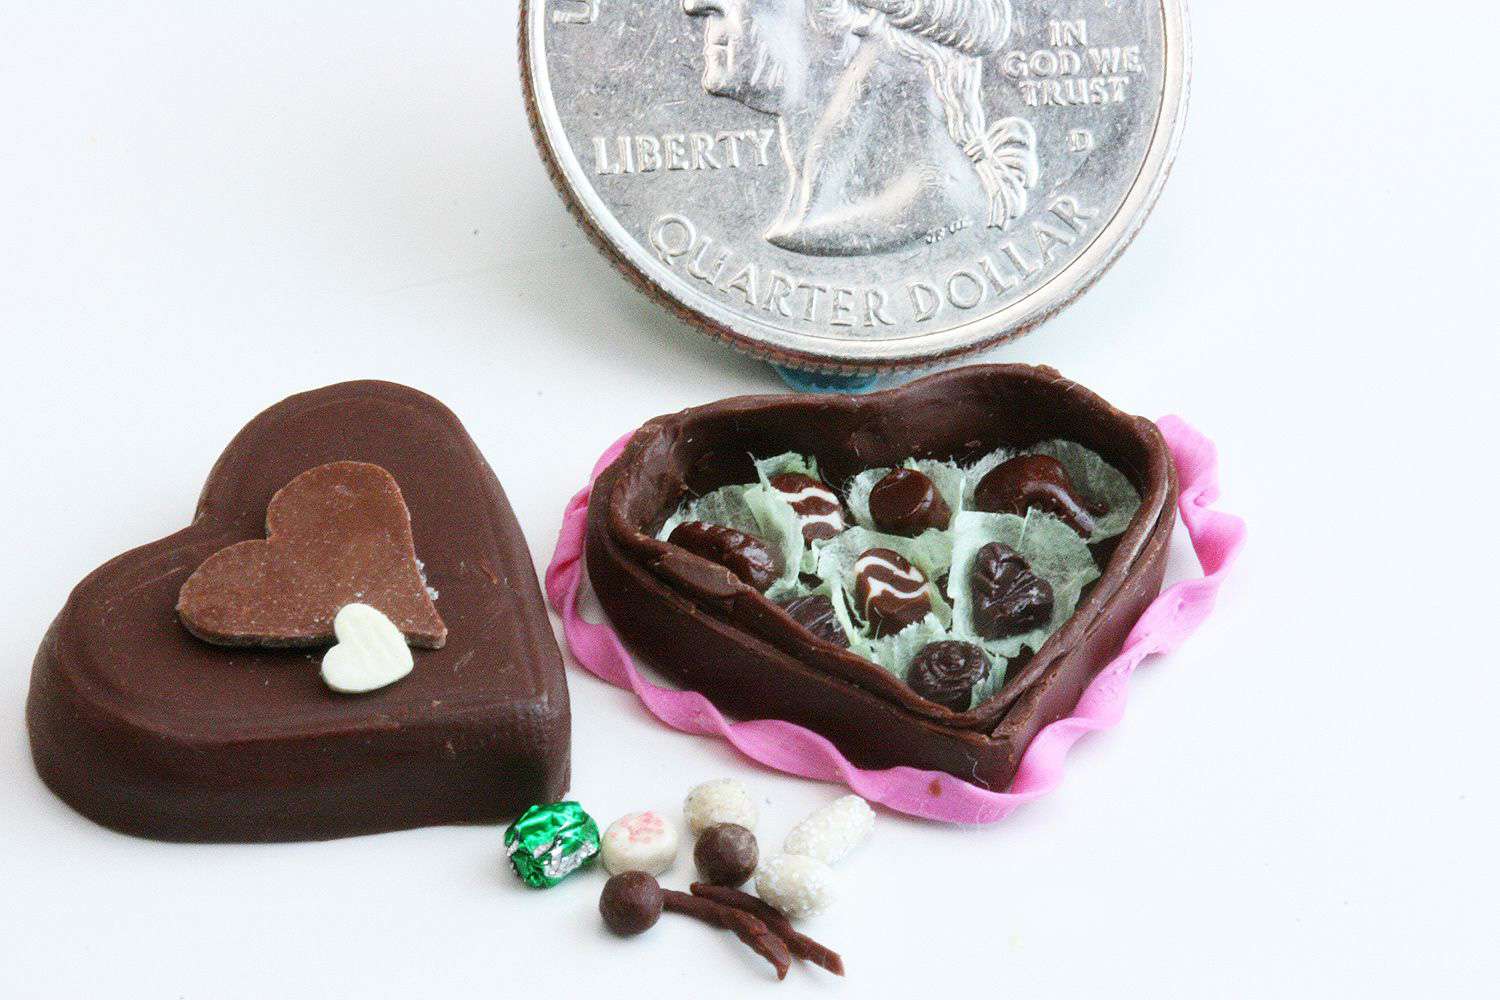 Chocolate heart-shaped box made from polymer clay over a metal former